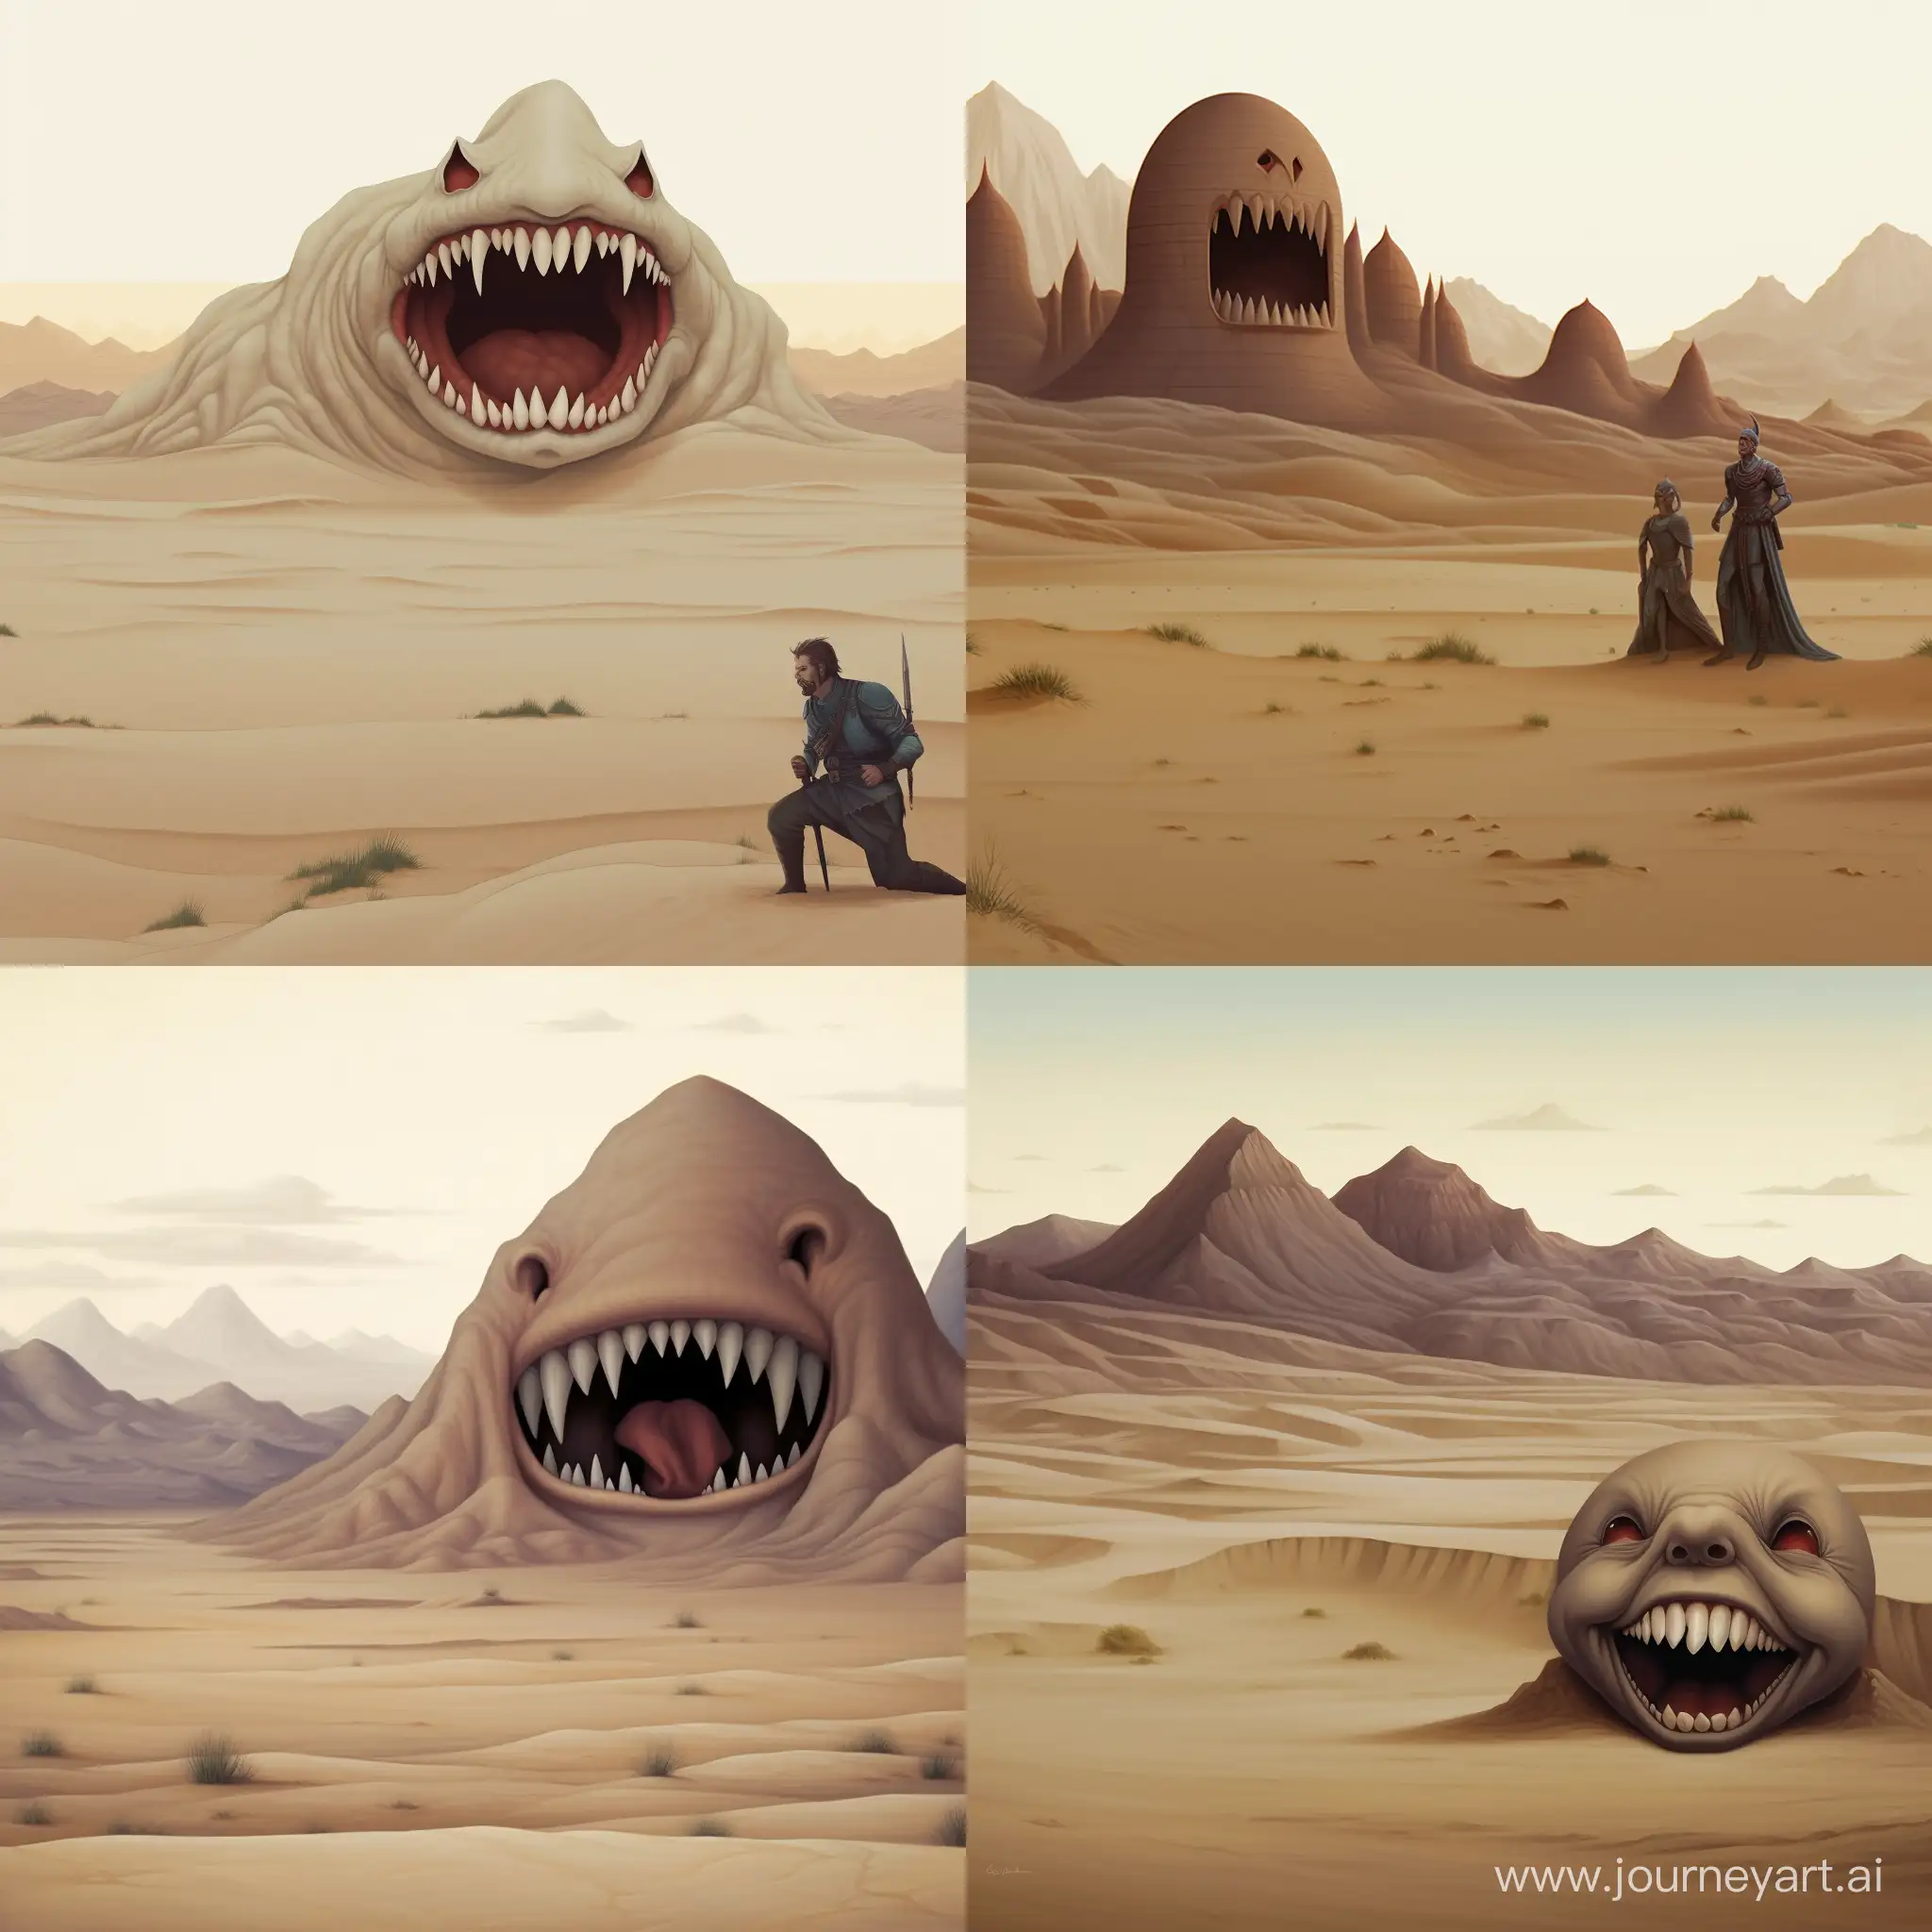 5 DESERT DWELLERS LAUGHING AT A MAN  IN DESERT AREAT